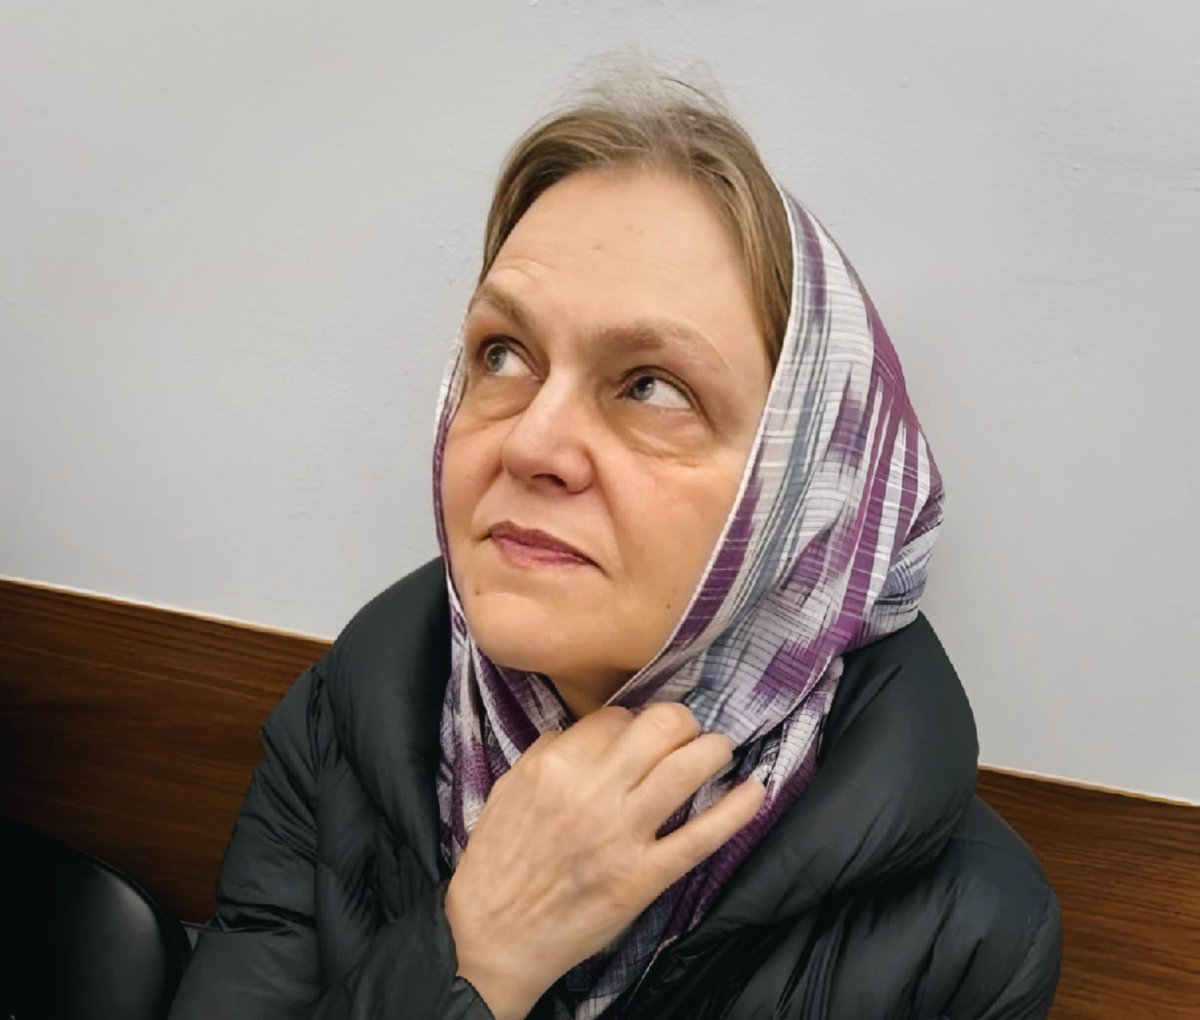 #Russia: #NadezhdaKevorkova arrested for allegedly 'justifying terrorism.' Middle East reporter, who worked with both independent & Kremlin-funded media, faces probe for Taliban-related Telegram posts. #WPF denounces attempt to criminalize journalism, Kevorkova must be released.